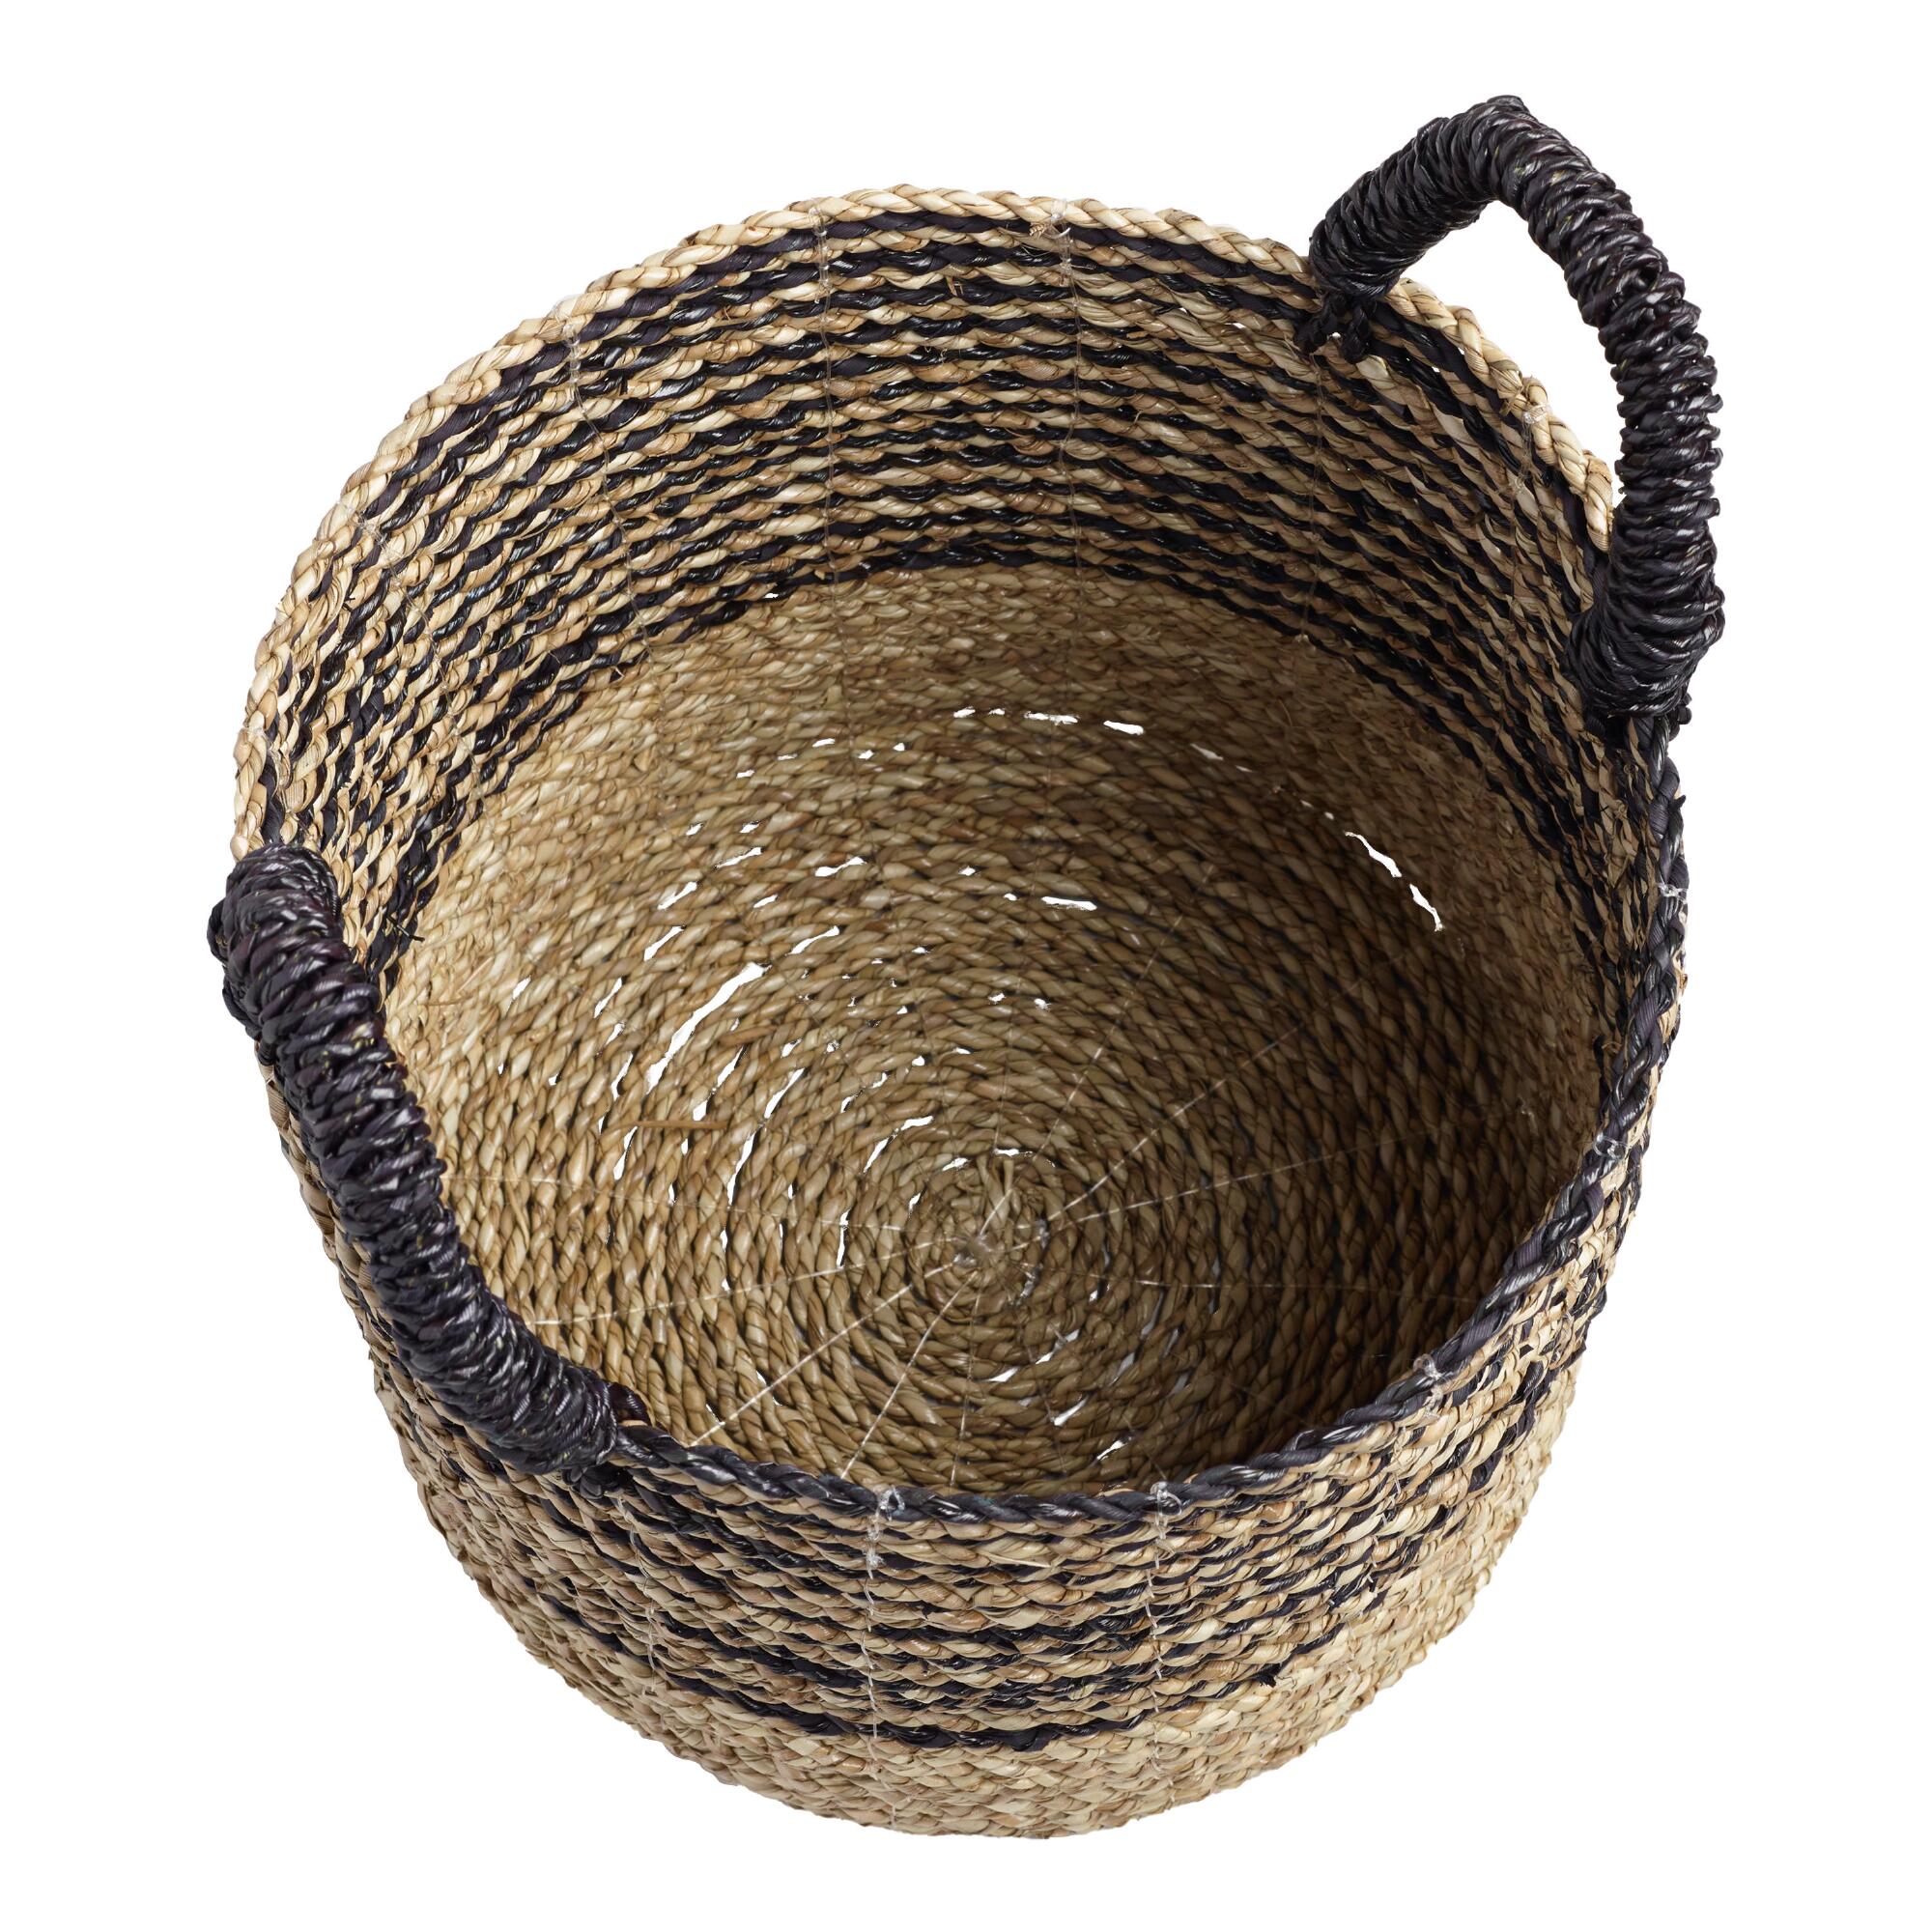 Small Black and Natural Seagrass Calista Tote Basket: Black/Natural by World Market